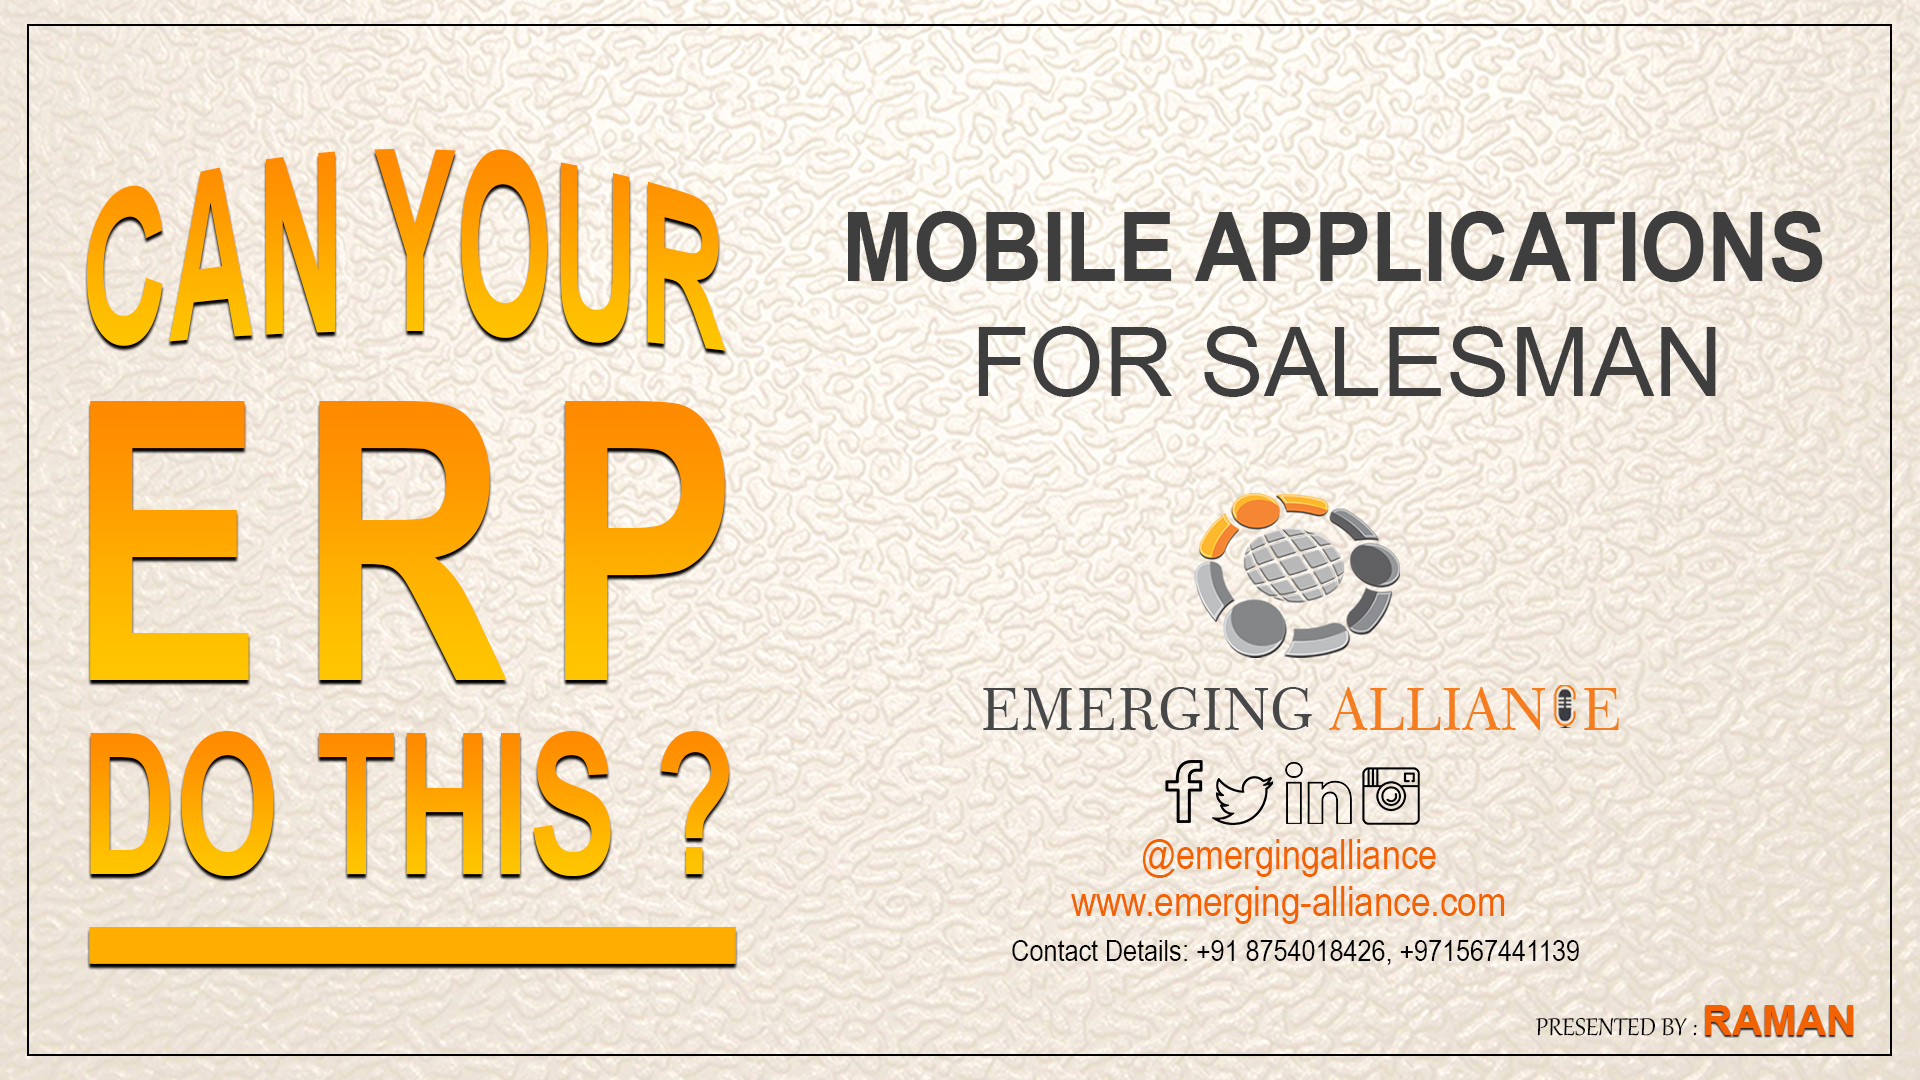 mobile applications for salesman with erp